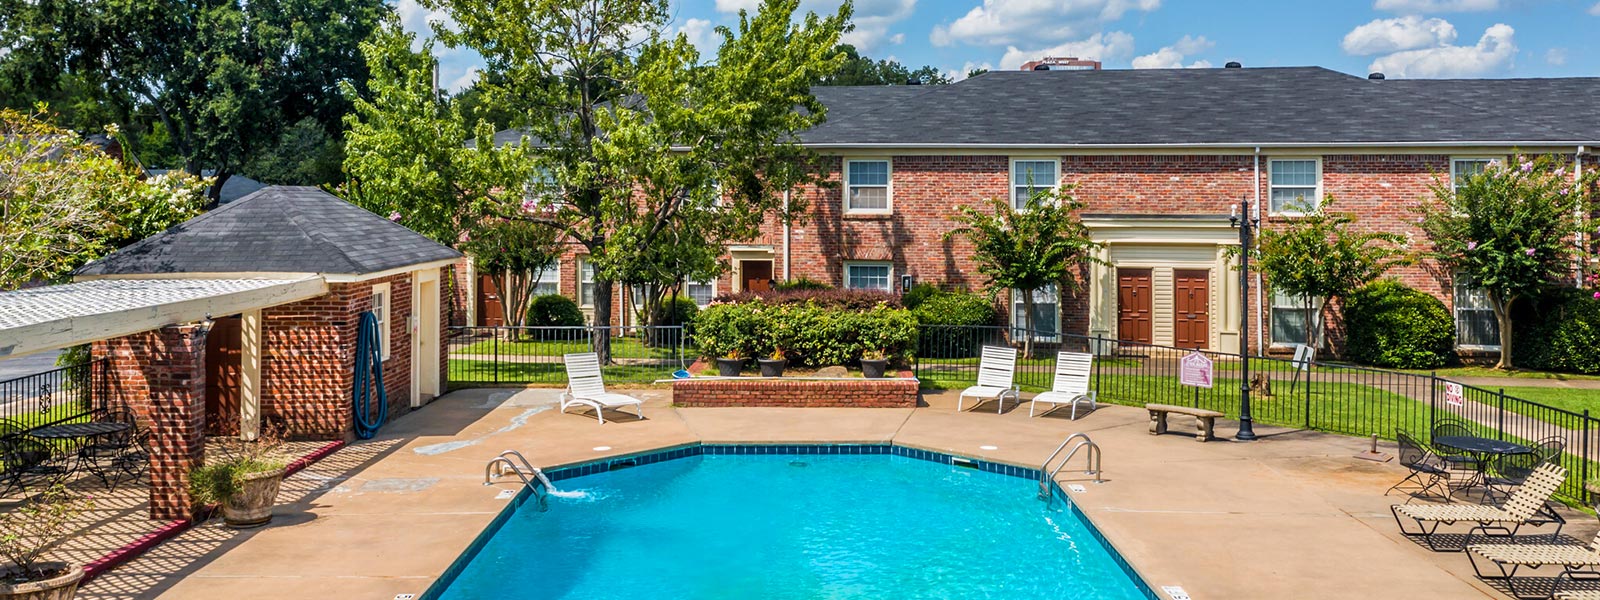 Georgetown Apartments in Little Rock, AR